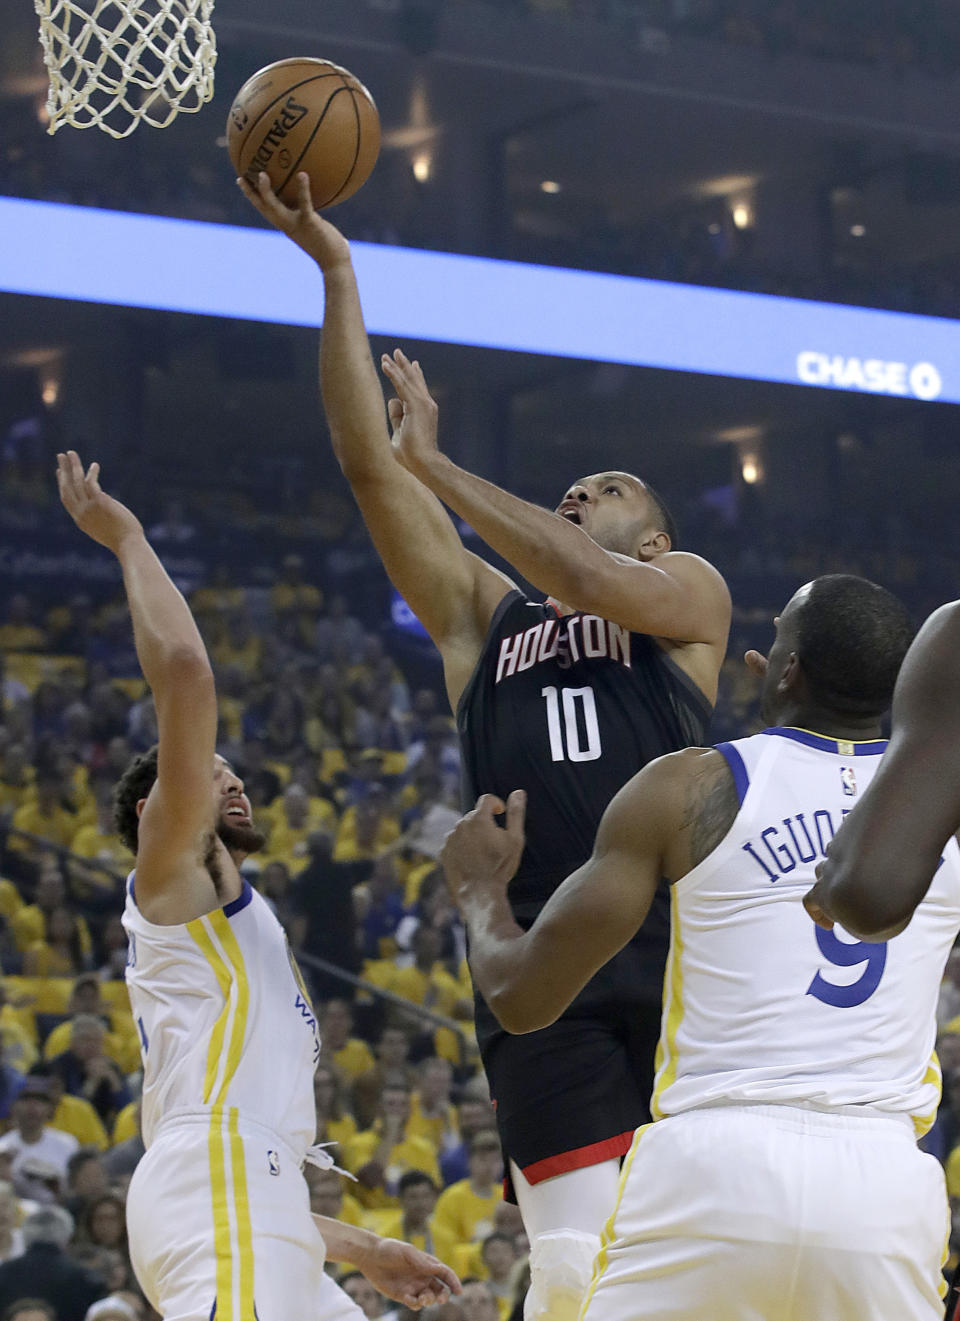 Houston Rockets guard Eric Gordon (10) shoots between Golden State Warriors guards Klay Thompson, left, and Andre Iguodala during the first half of Game 1 of a second-round NBA basketball playoff series in Oakland, Calif., Sunday, April 28, 2019. (AP Photo/Jeff Chiu)